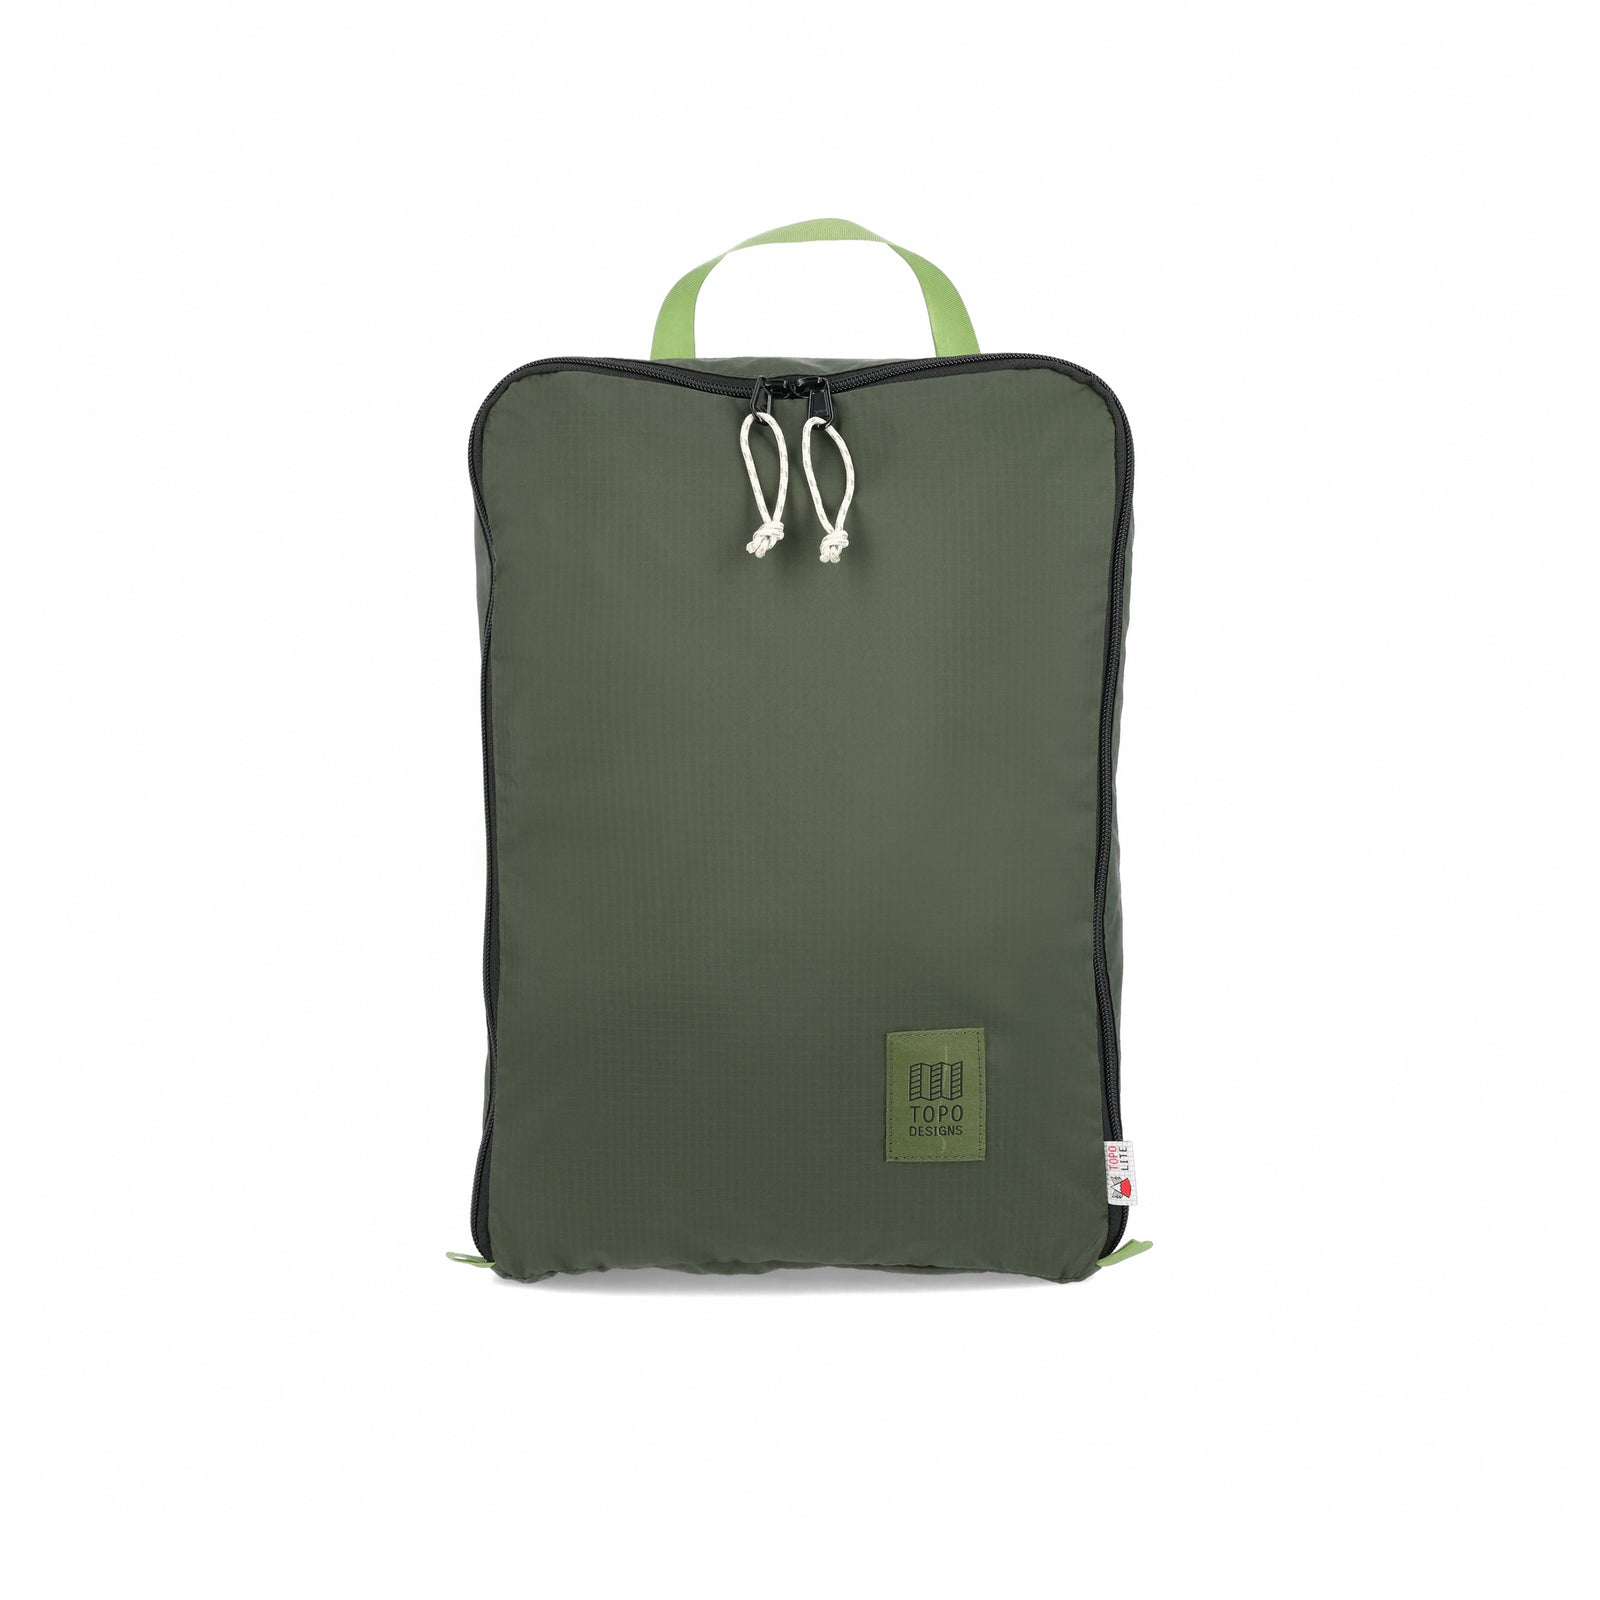 Topo Designs TopoLite 10L Pack Bag ultralight packing cube for travel in "olive" green.